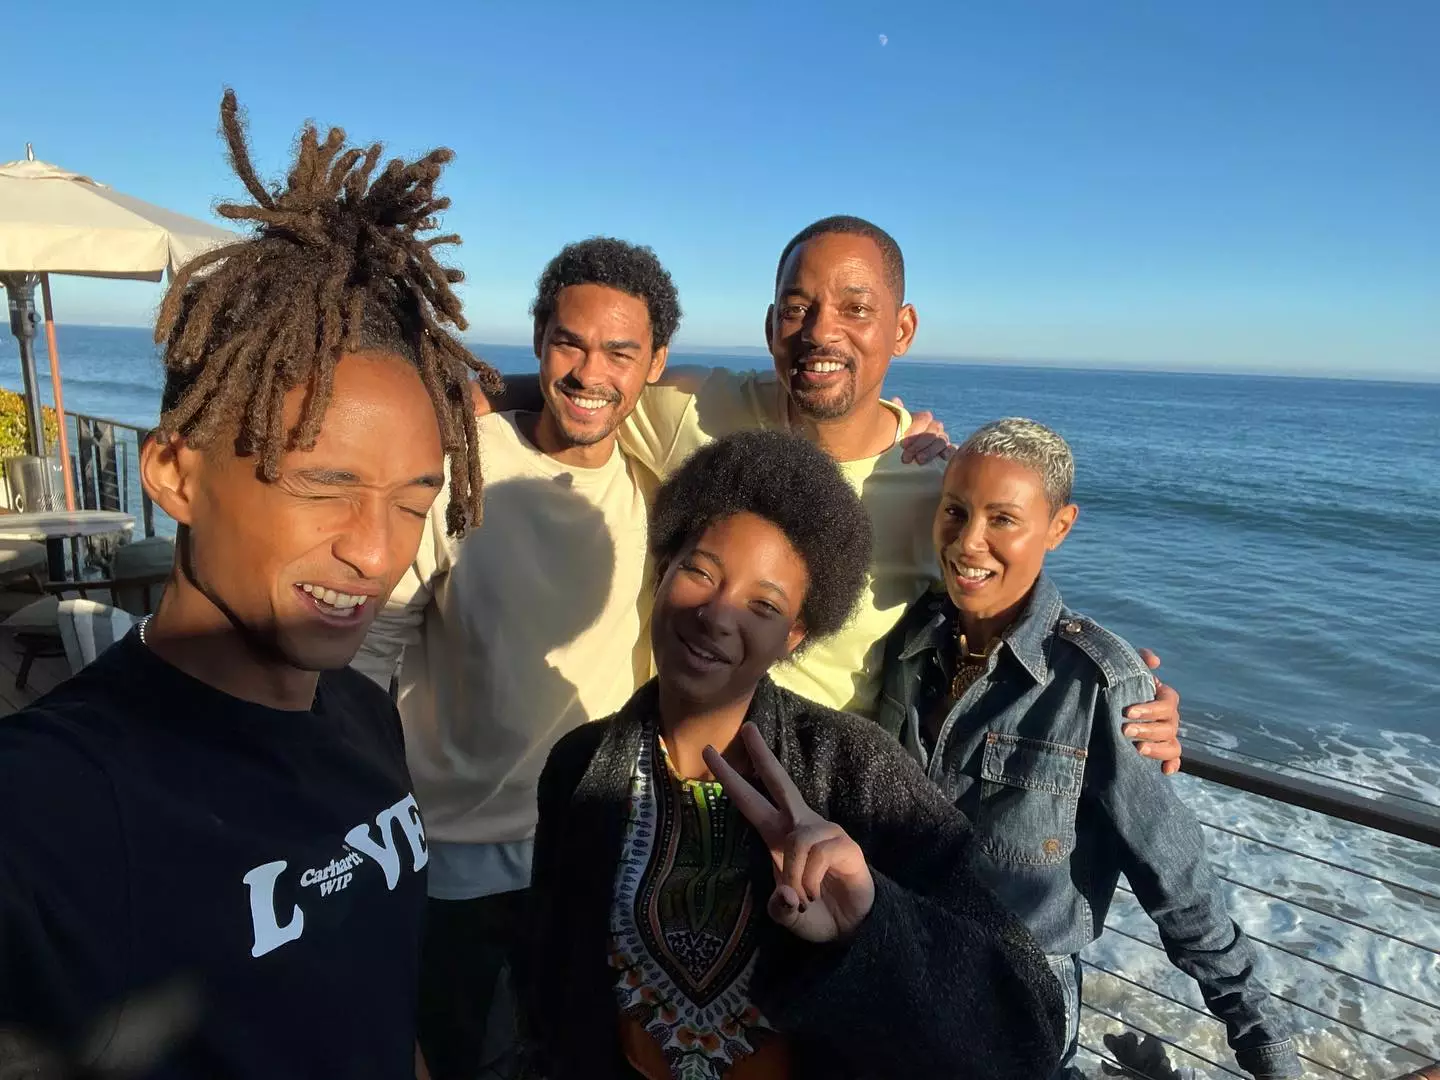 Will Smith is proud dad to three kids, two of whom he shares with Jada.